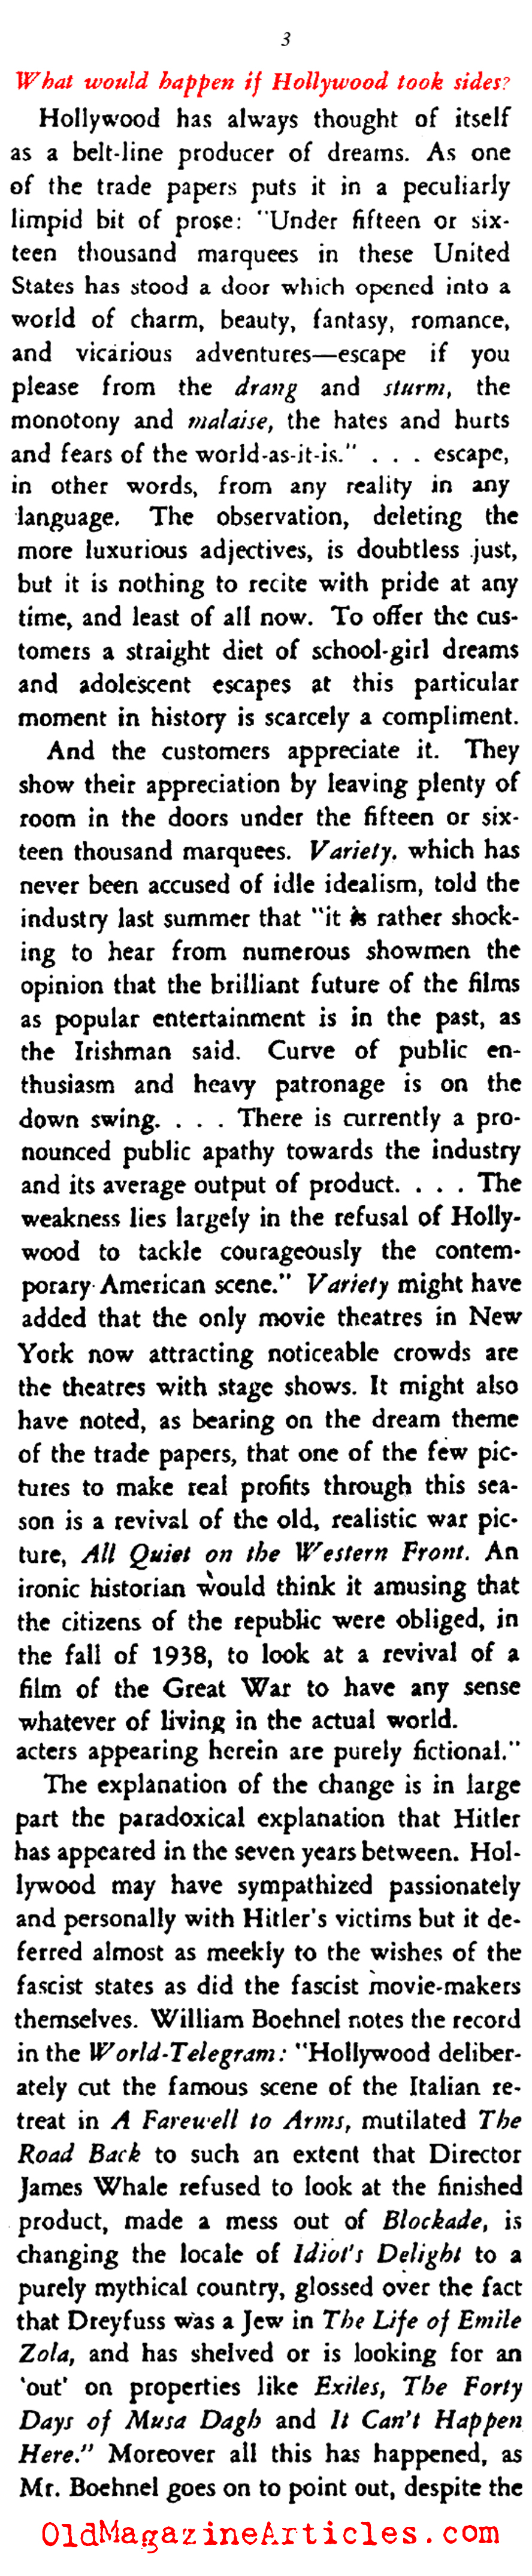 Social Issues in Movies (Stage Magazine, 1938)